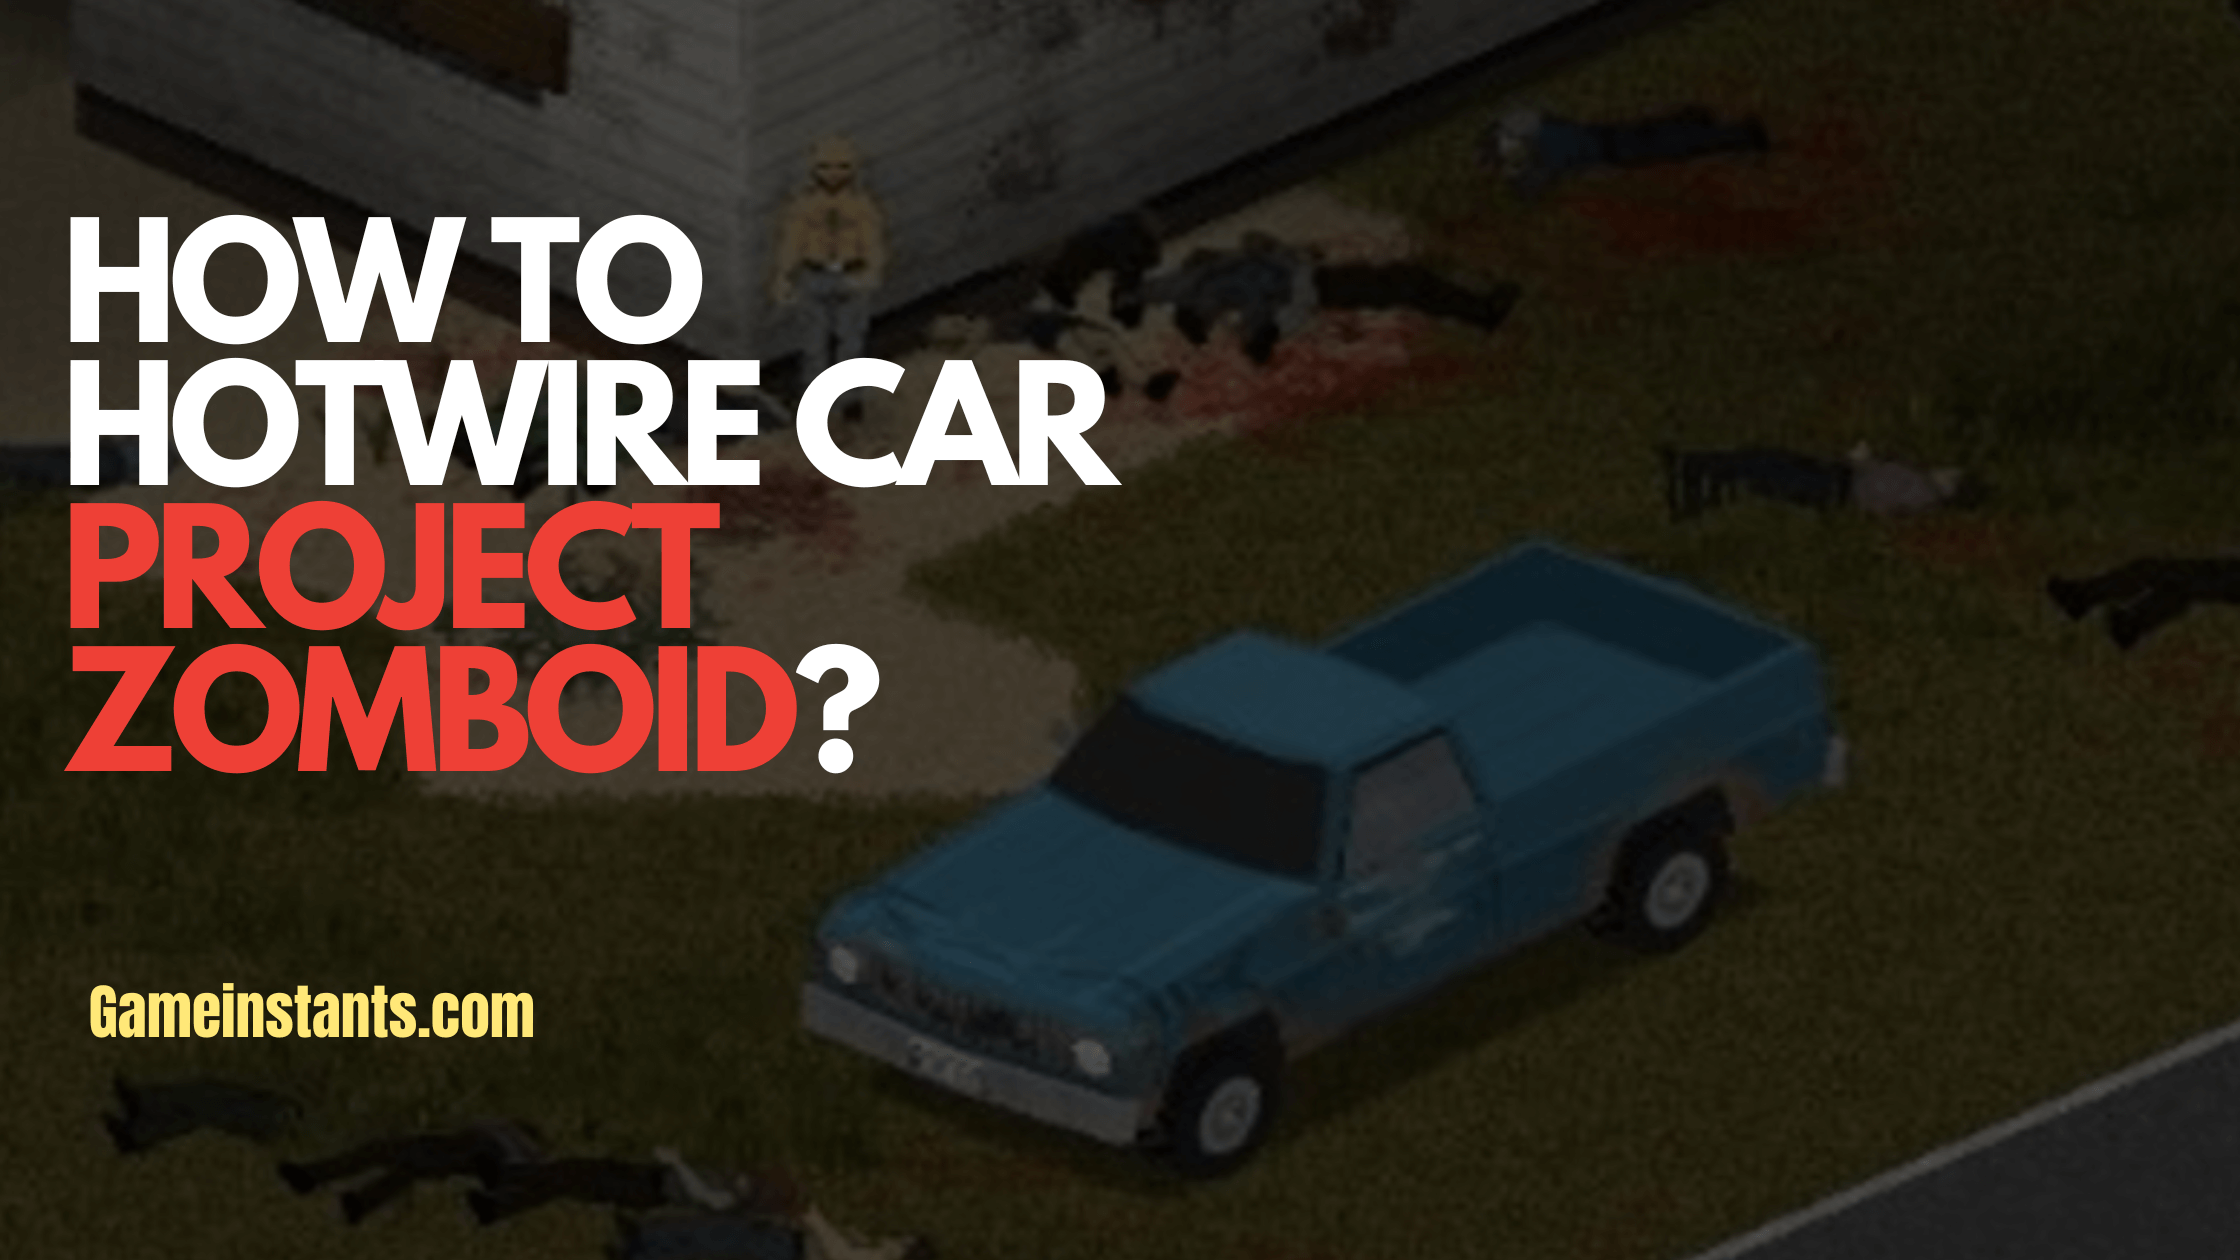 Hotwire Car Project Zomboid